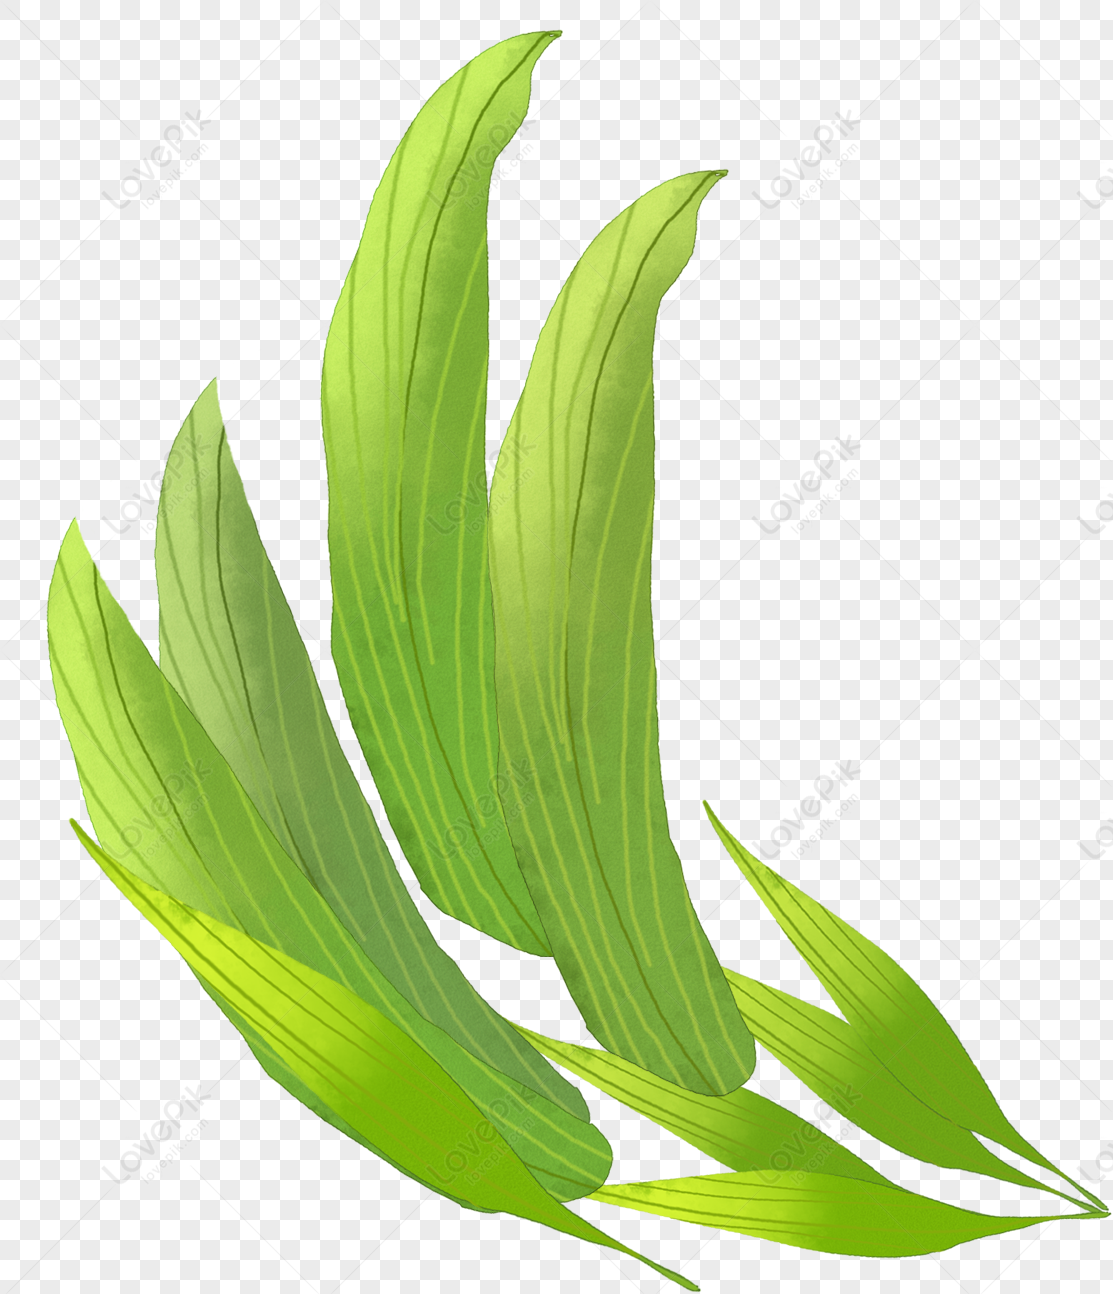 Fresh Plants Decoration Image PNG Hd Transparent Image And Clipart ...